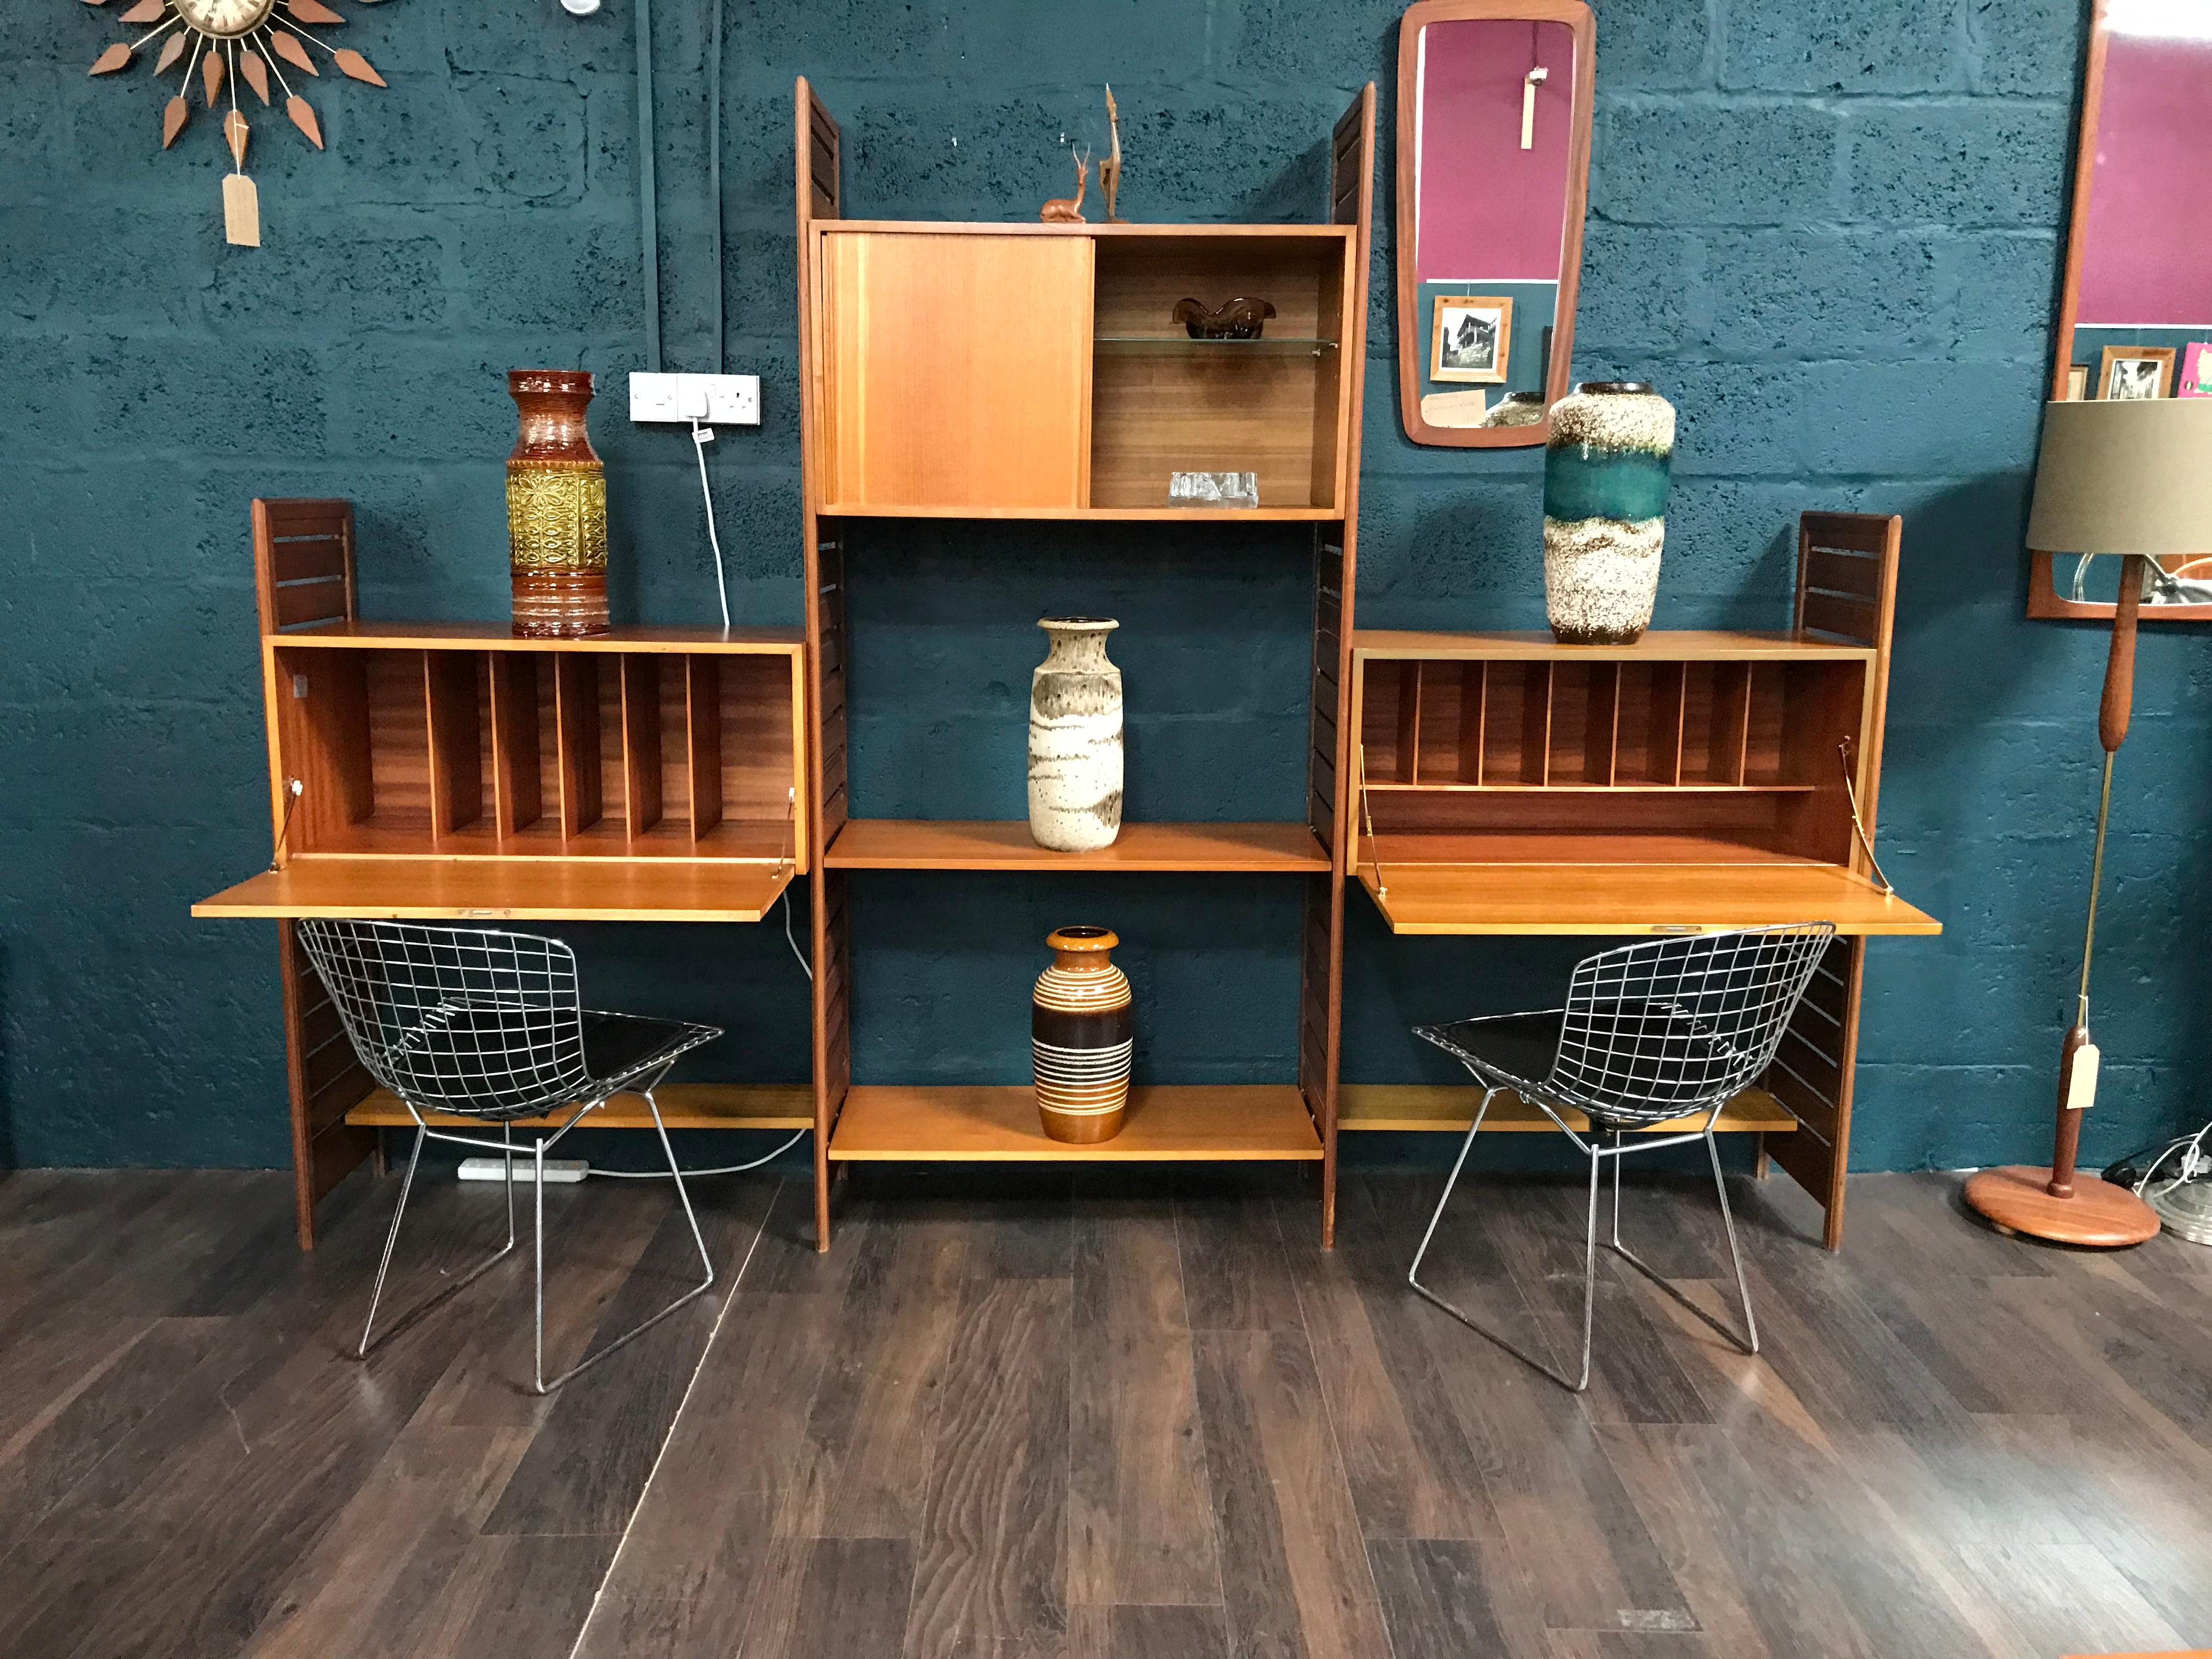 Stylish and functional, this is the Classic Staples Ladderax midcentury shelving system. The wooden uprights and easy removable supports, allow the teak cabinetry to be positioned wherever required. This is a very versatile piece of retro furniture.